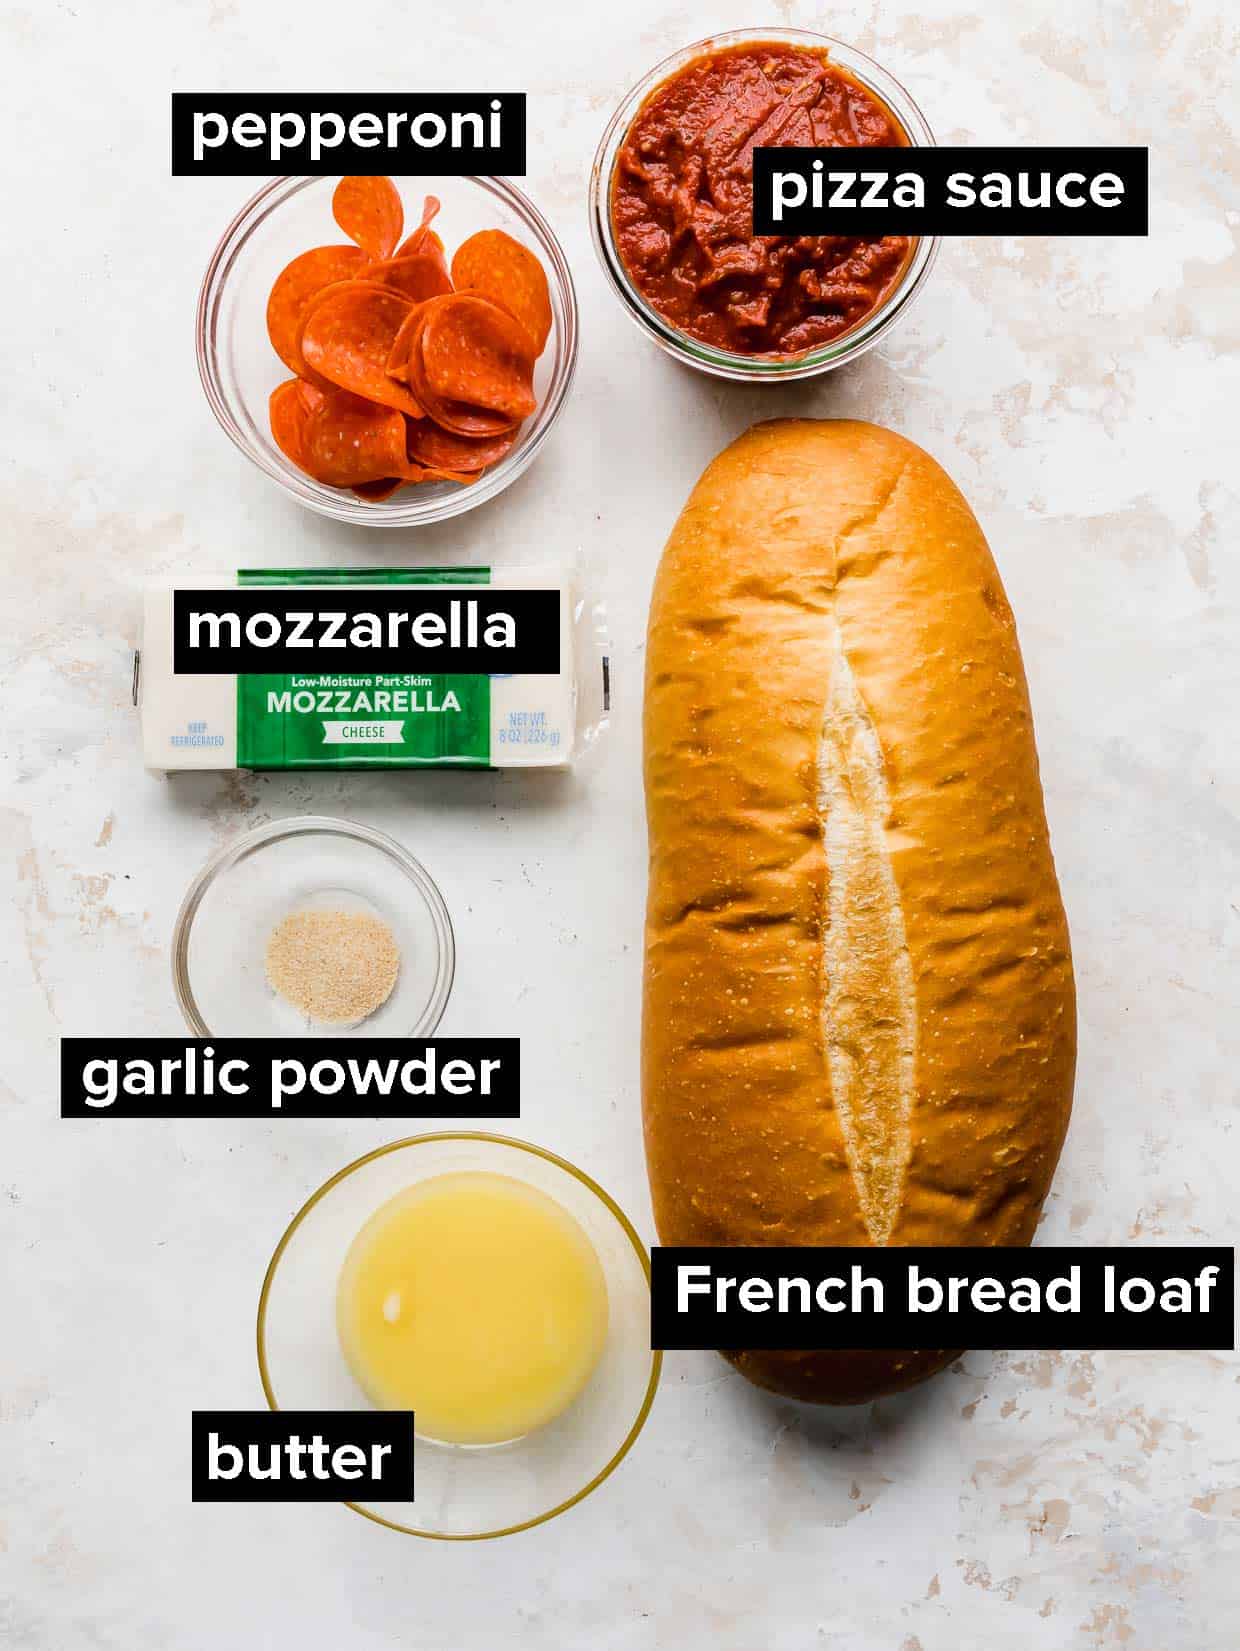 Ingredients used to make French bread pizza.